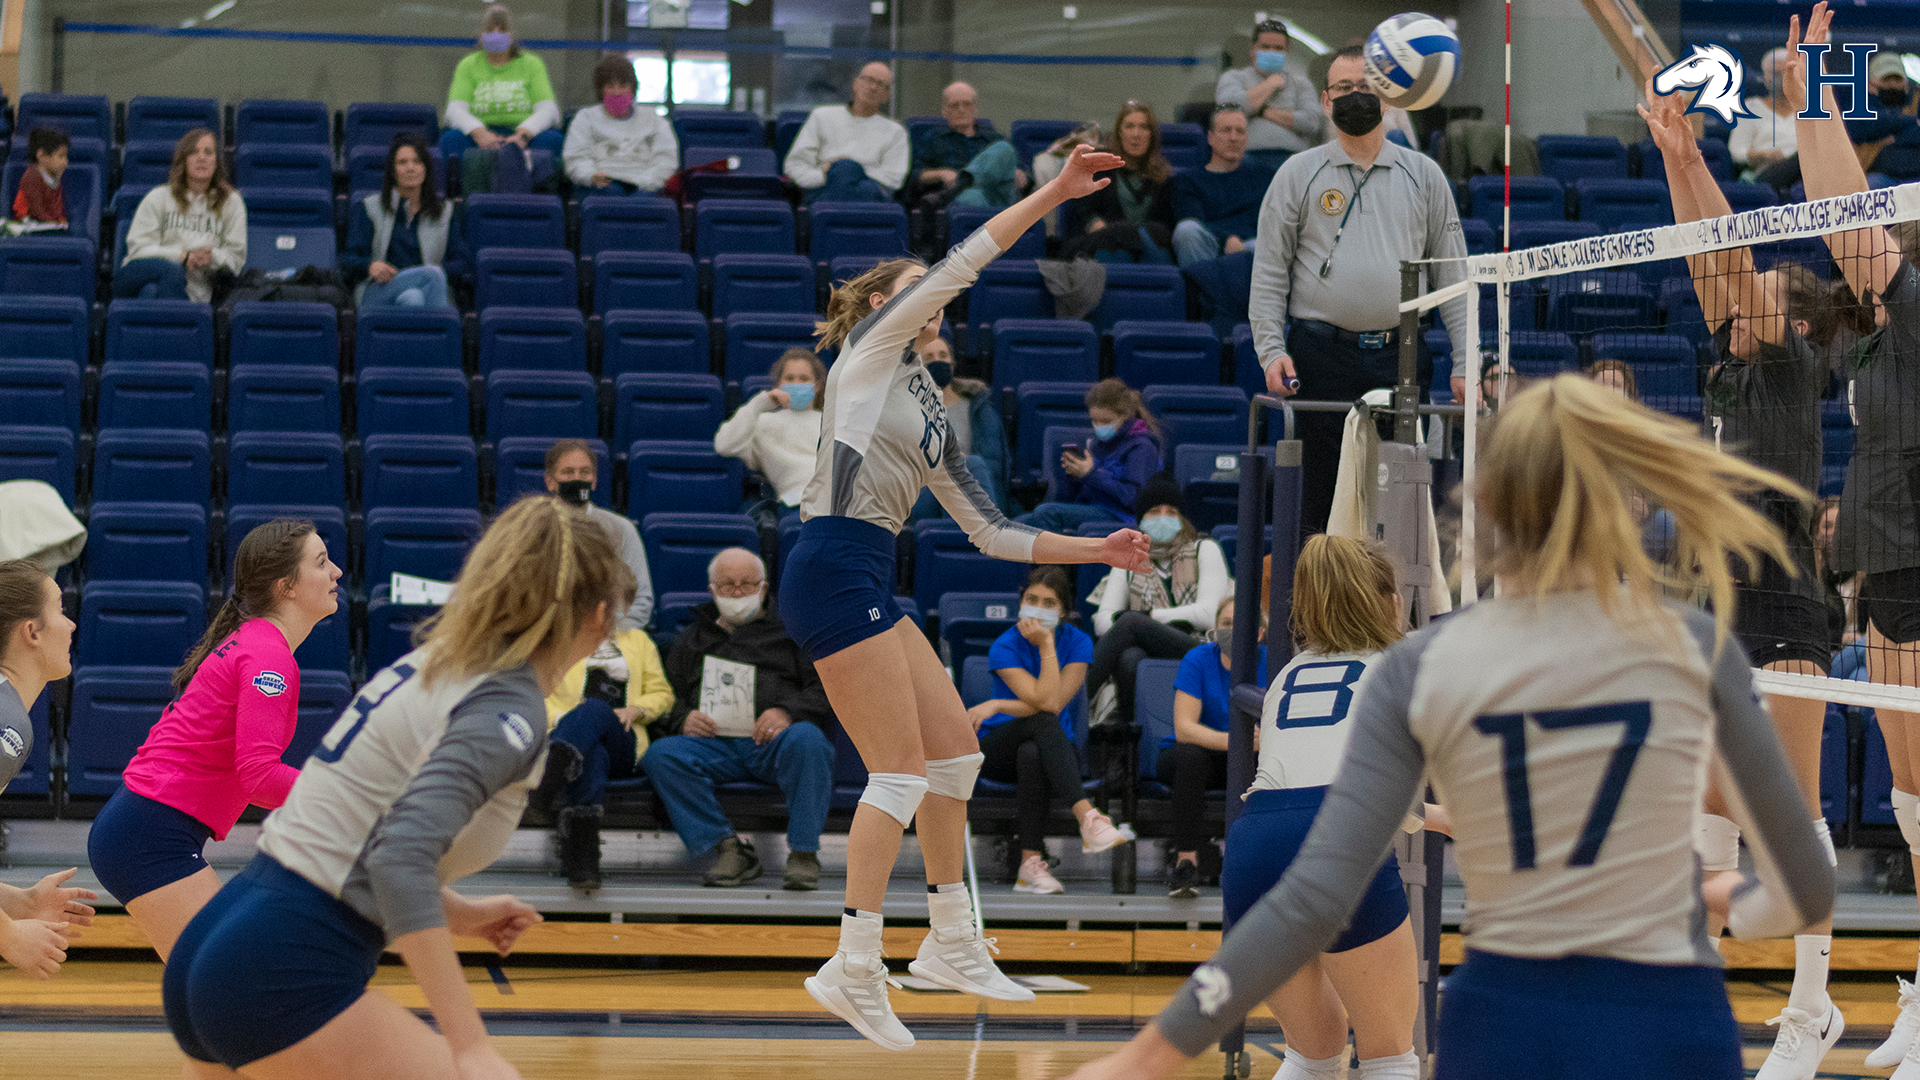 Top-seeded Chargers sweep Ursuline to advance to G-MAC Volleyball tourney semifinals